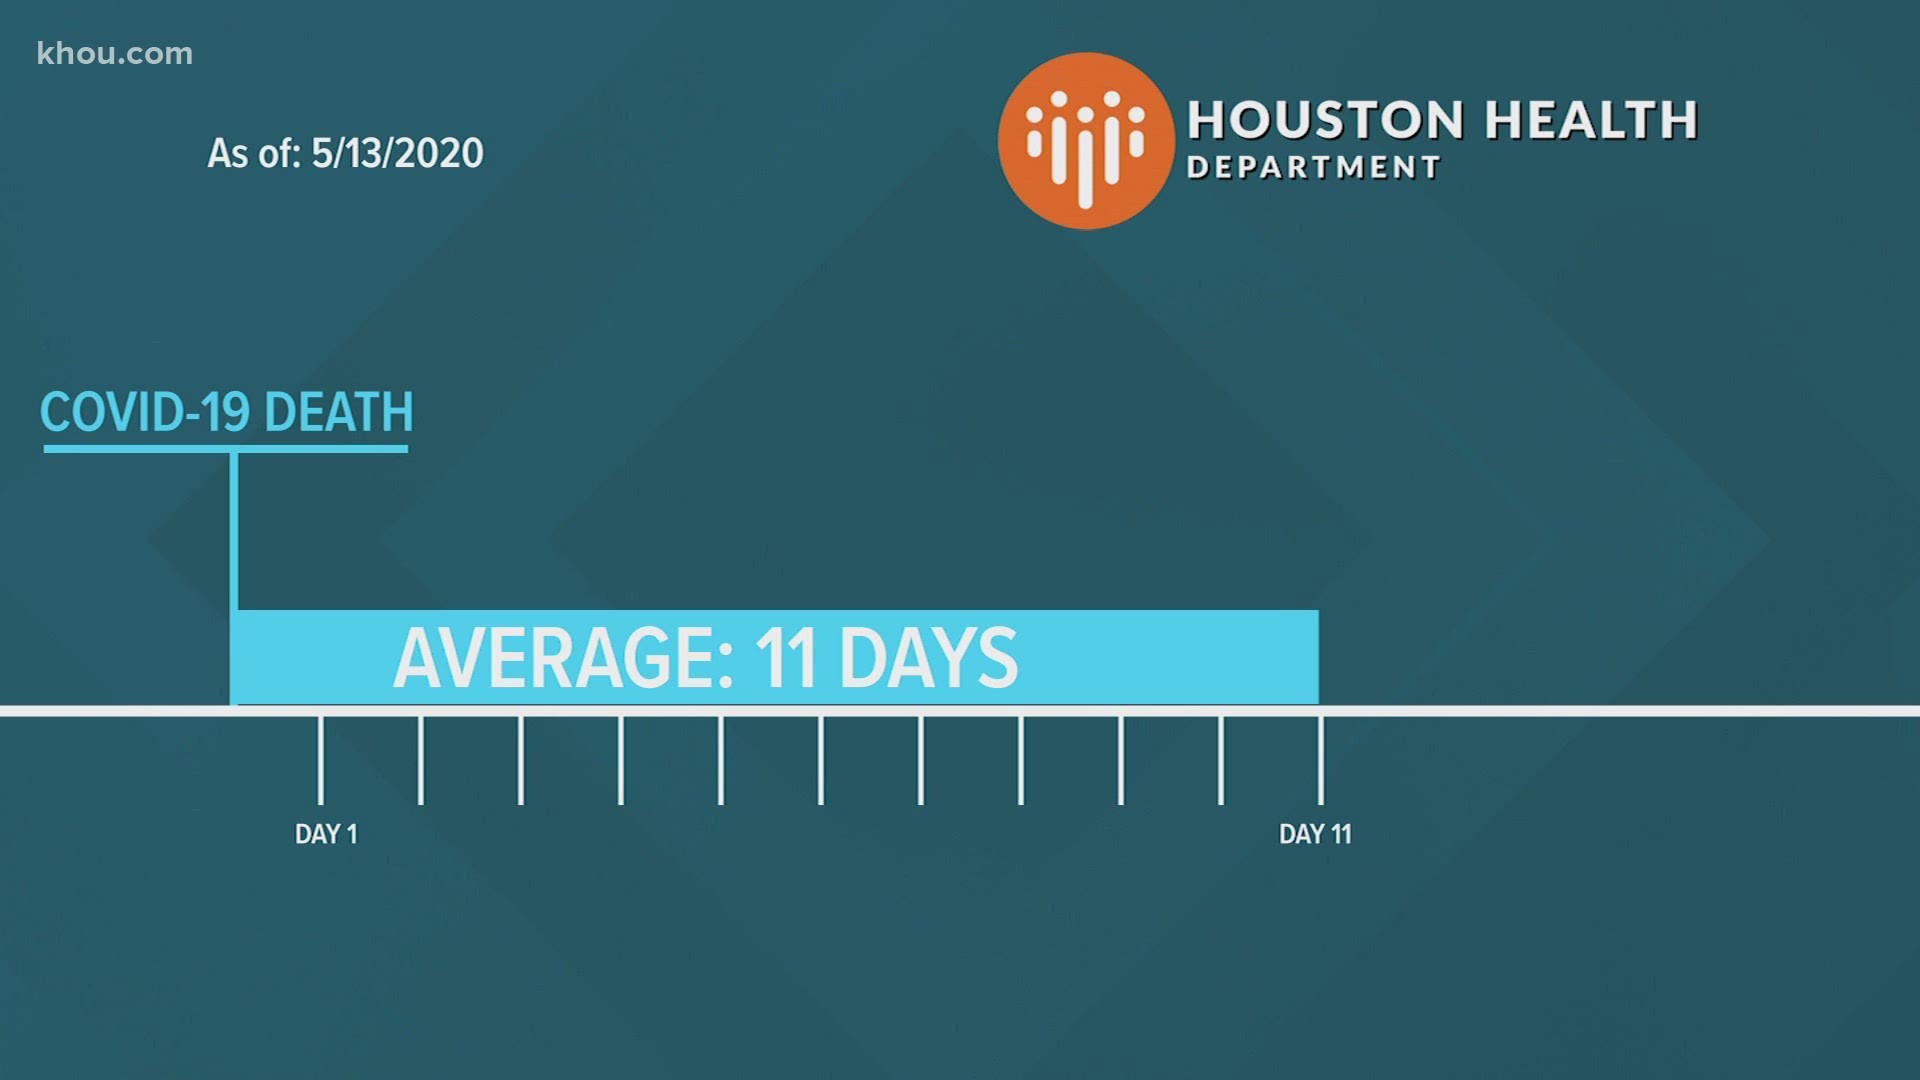 Every day the city of Houston releases new COVID-19 death numbers. On average, those numbers are 11 days old.